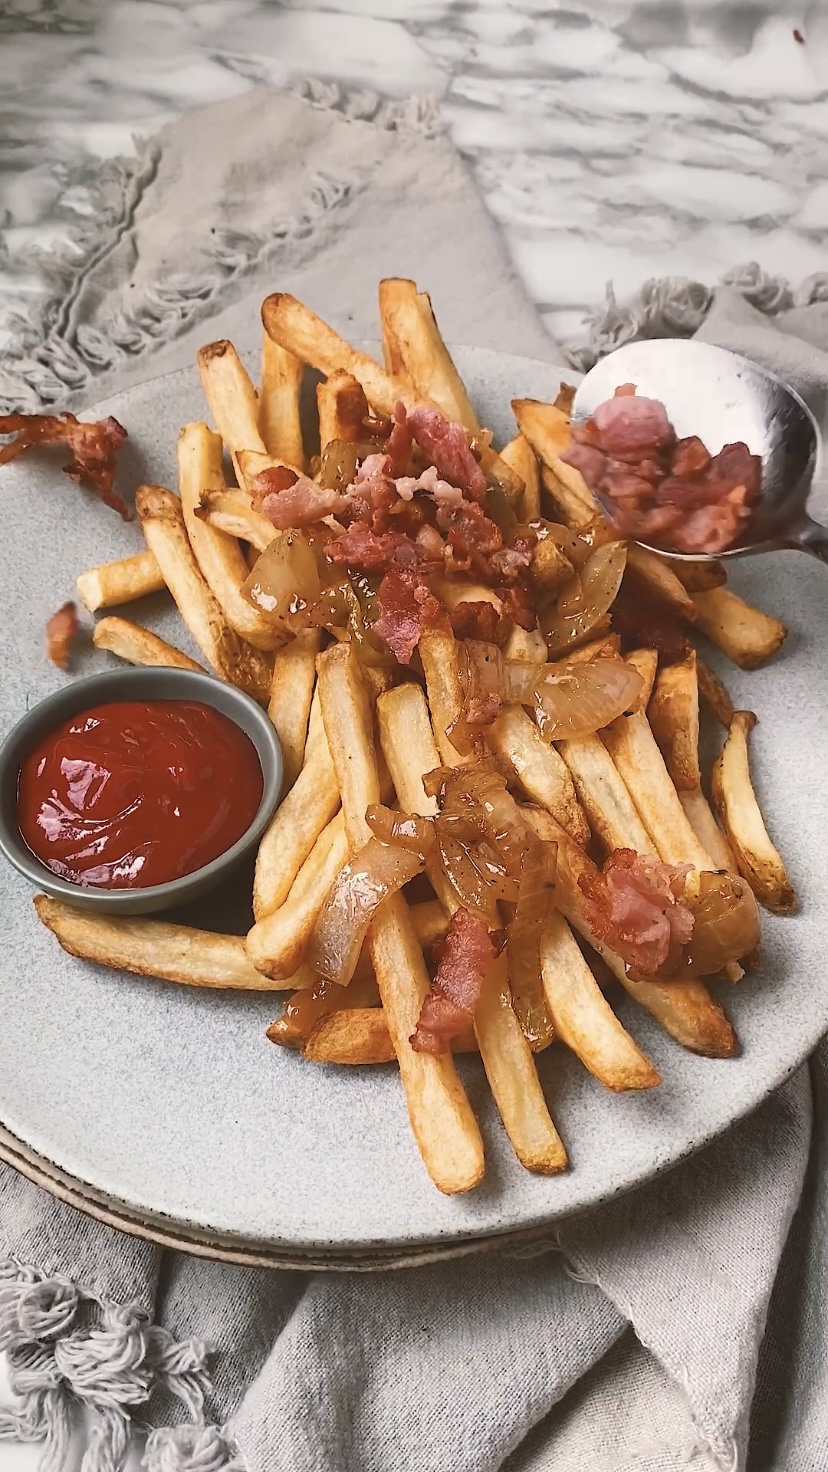 Adding bacon to fries.